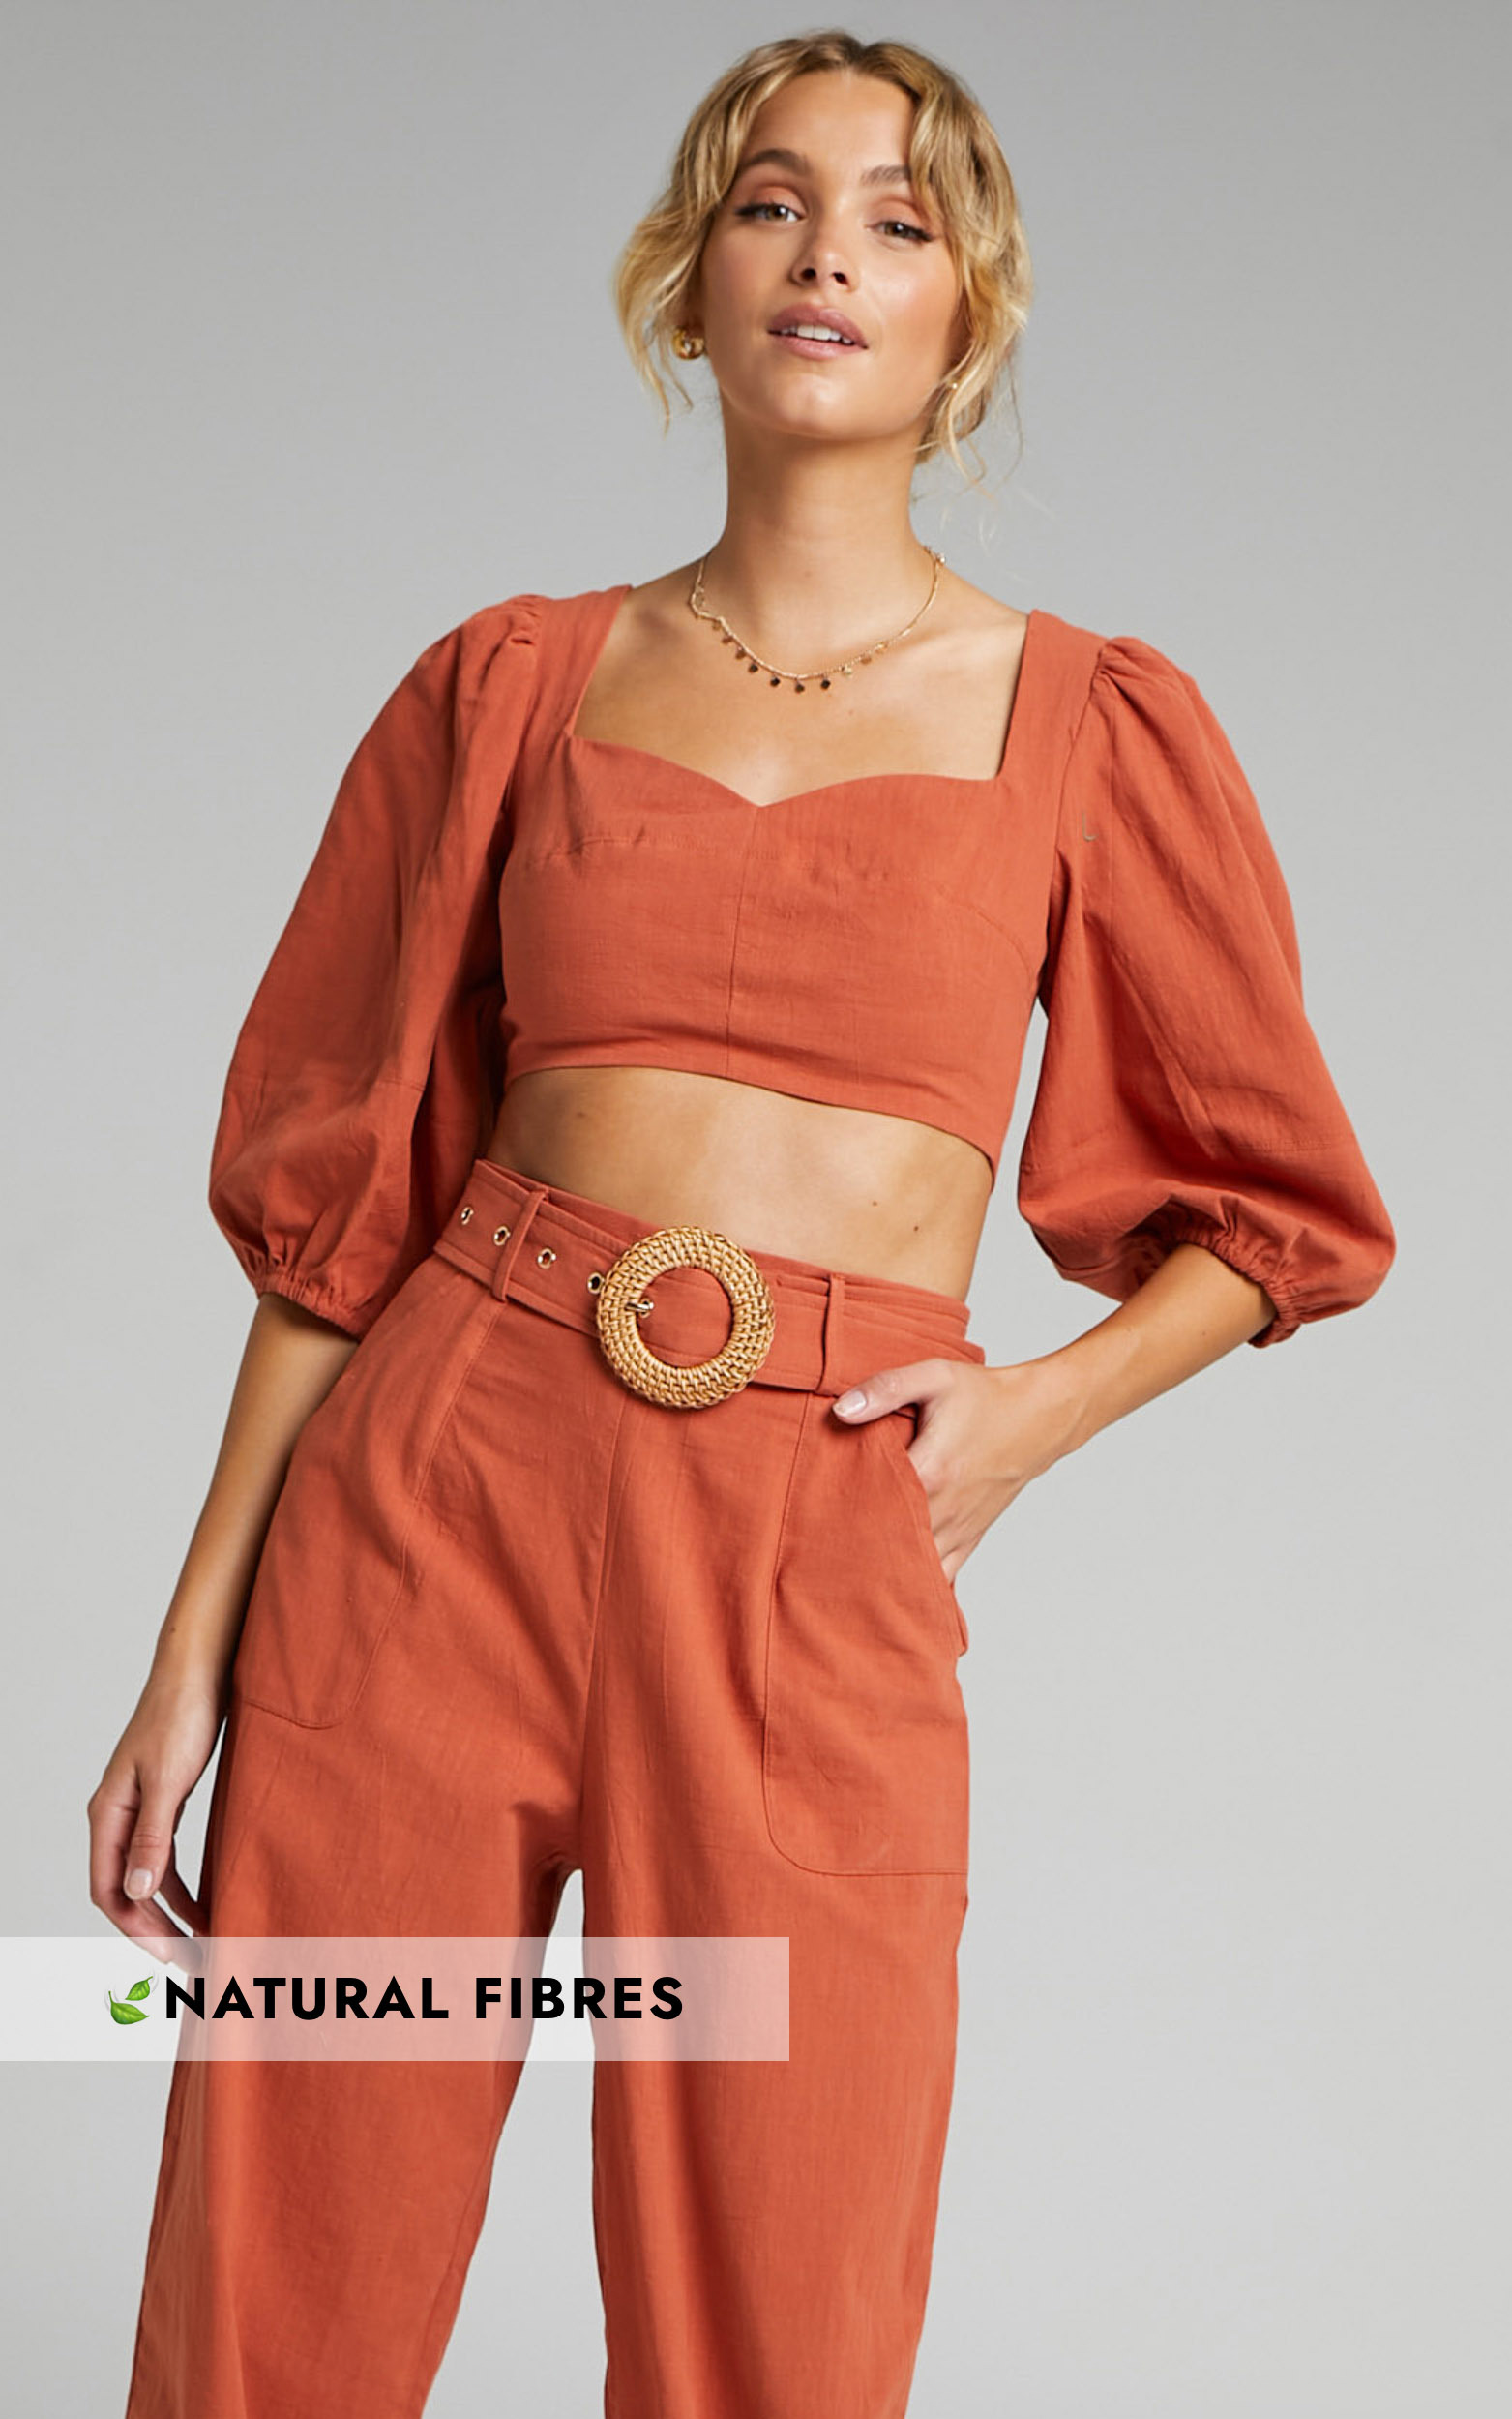 Amalie The Label - Ivy Cotton Puff Sleeve Open Tie Back Crop Top in Pink Clay - 06, BRN1, hi-res image number null